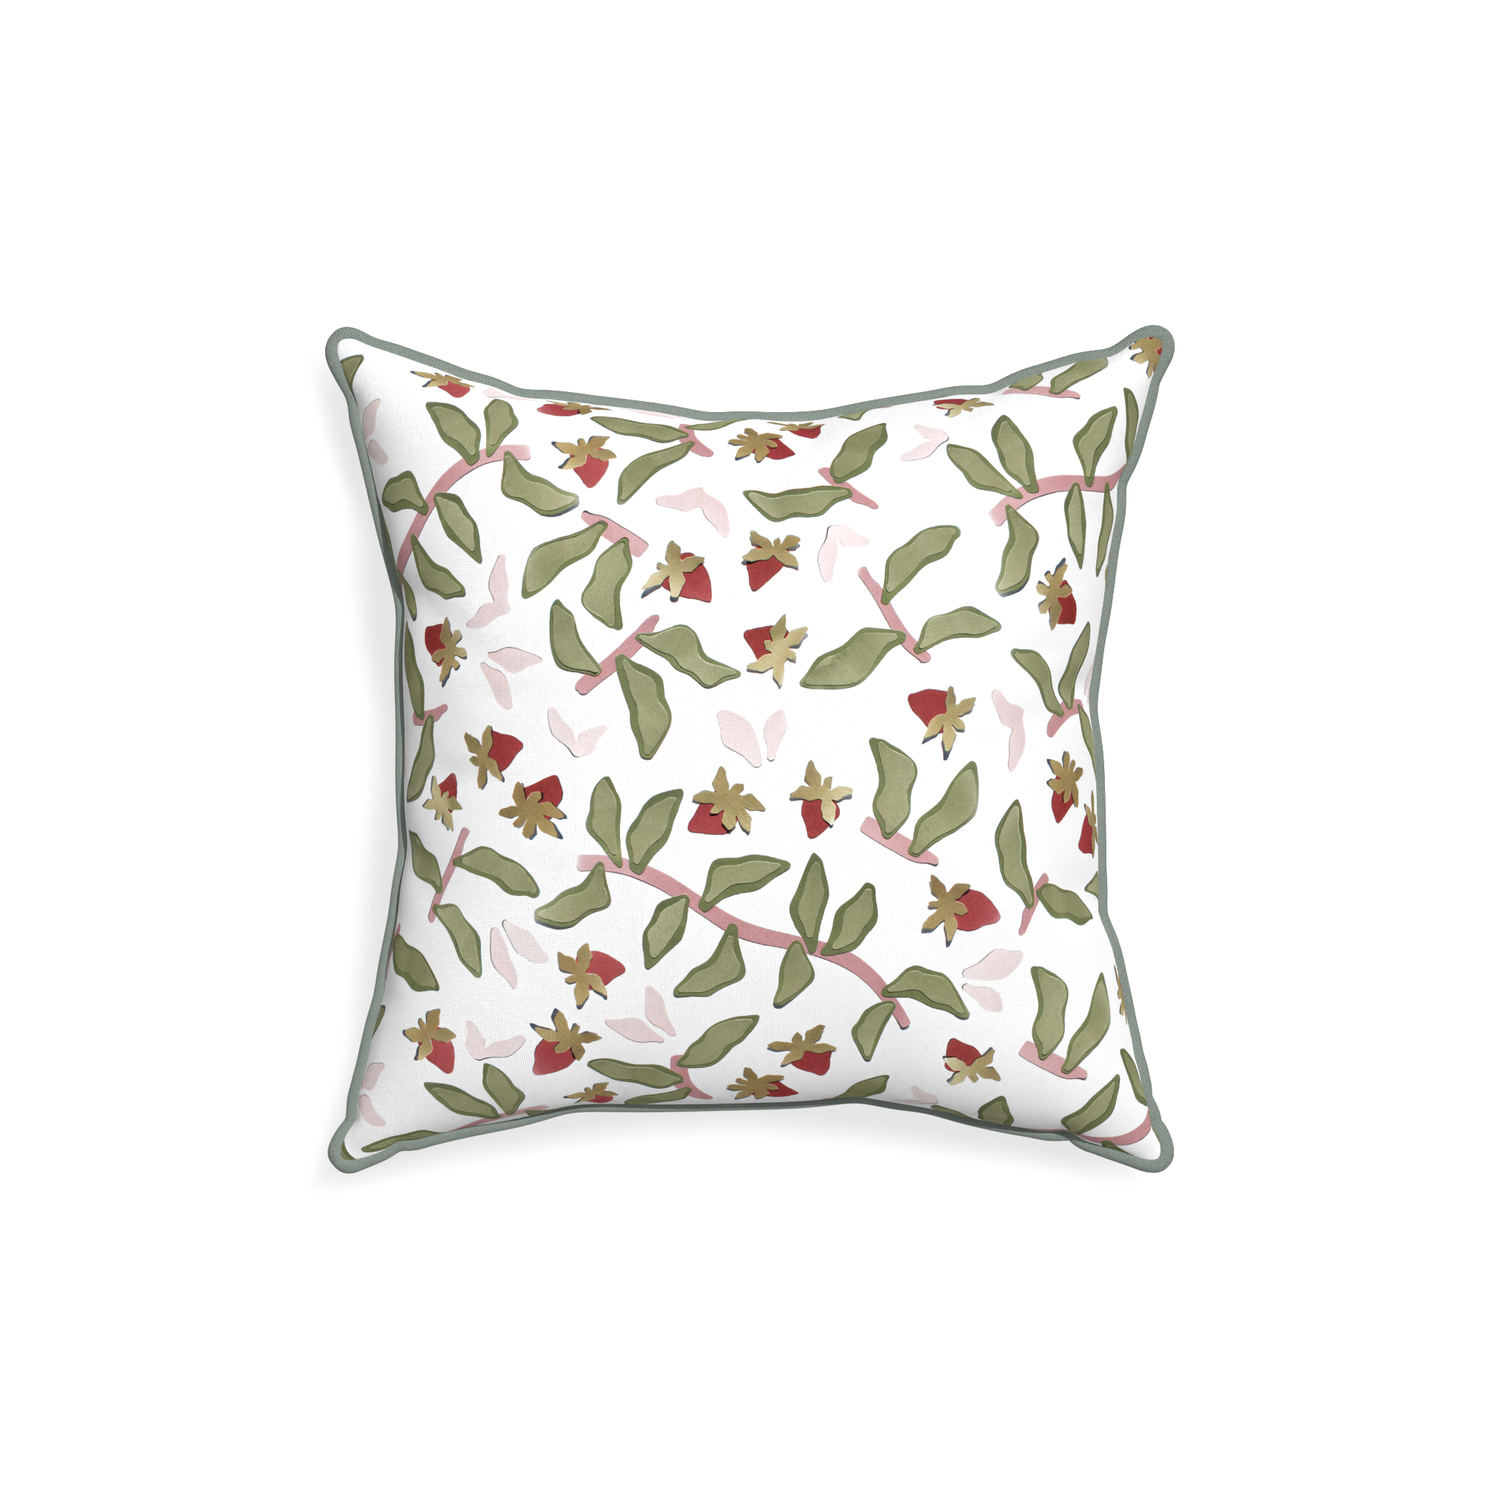 18-square nellie custom strawberry & botanicalpillow with sage piping on white background